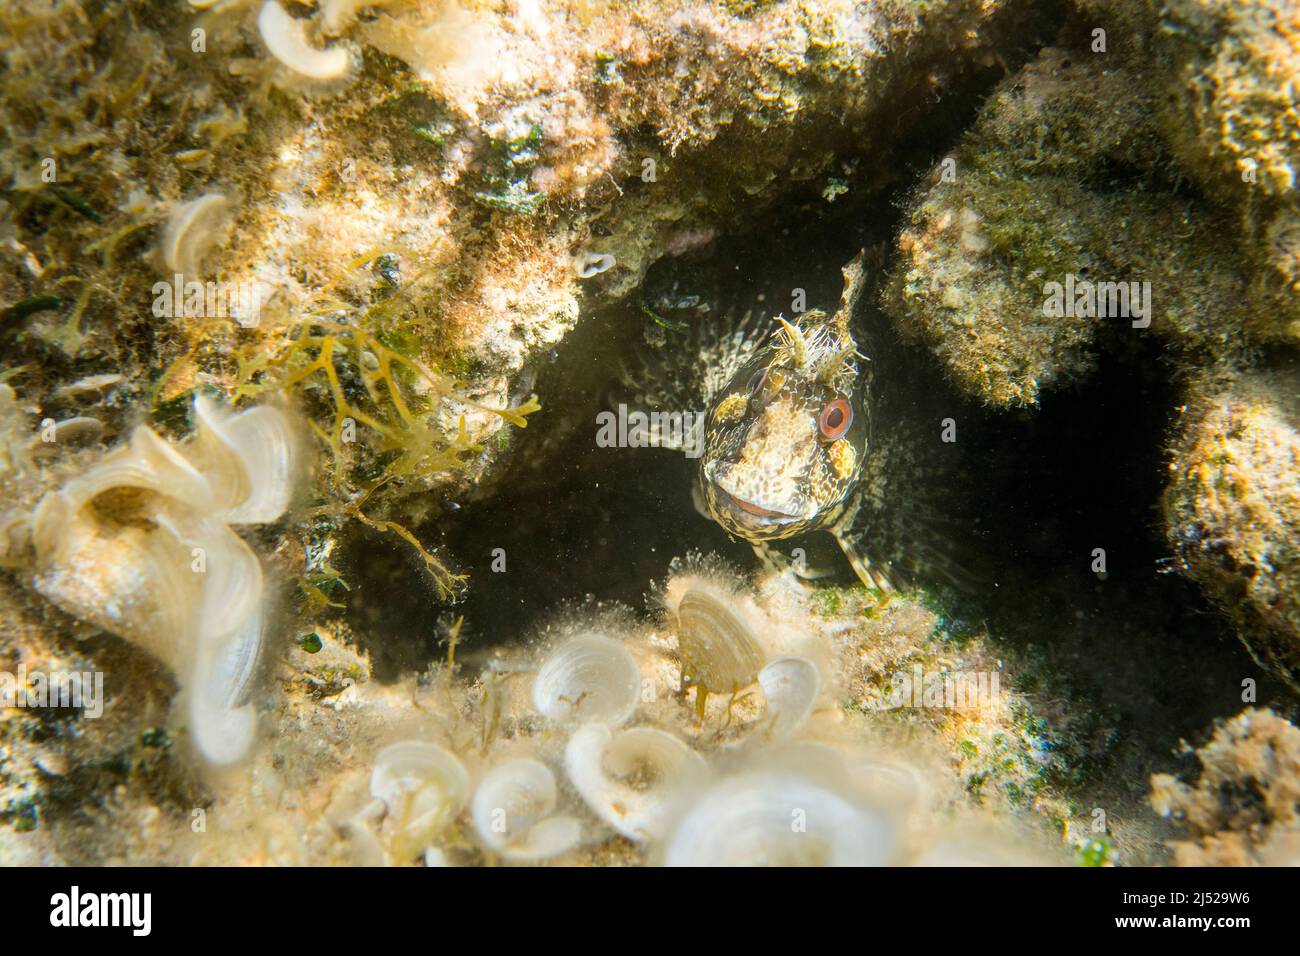 The tompot blenny (Parablennius gattorugine) is a species of combtooth blenny. Stock Photo